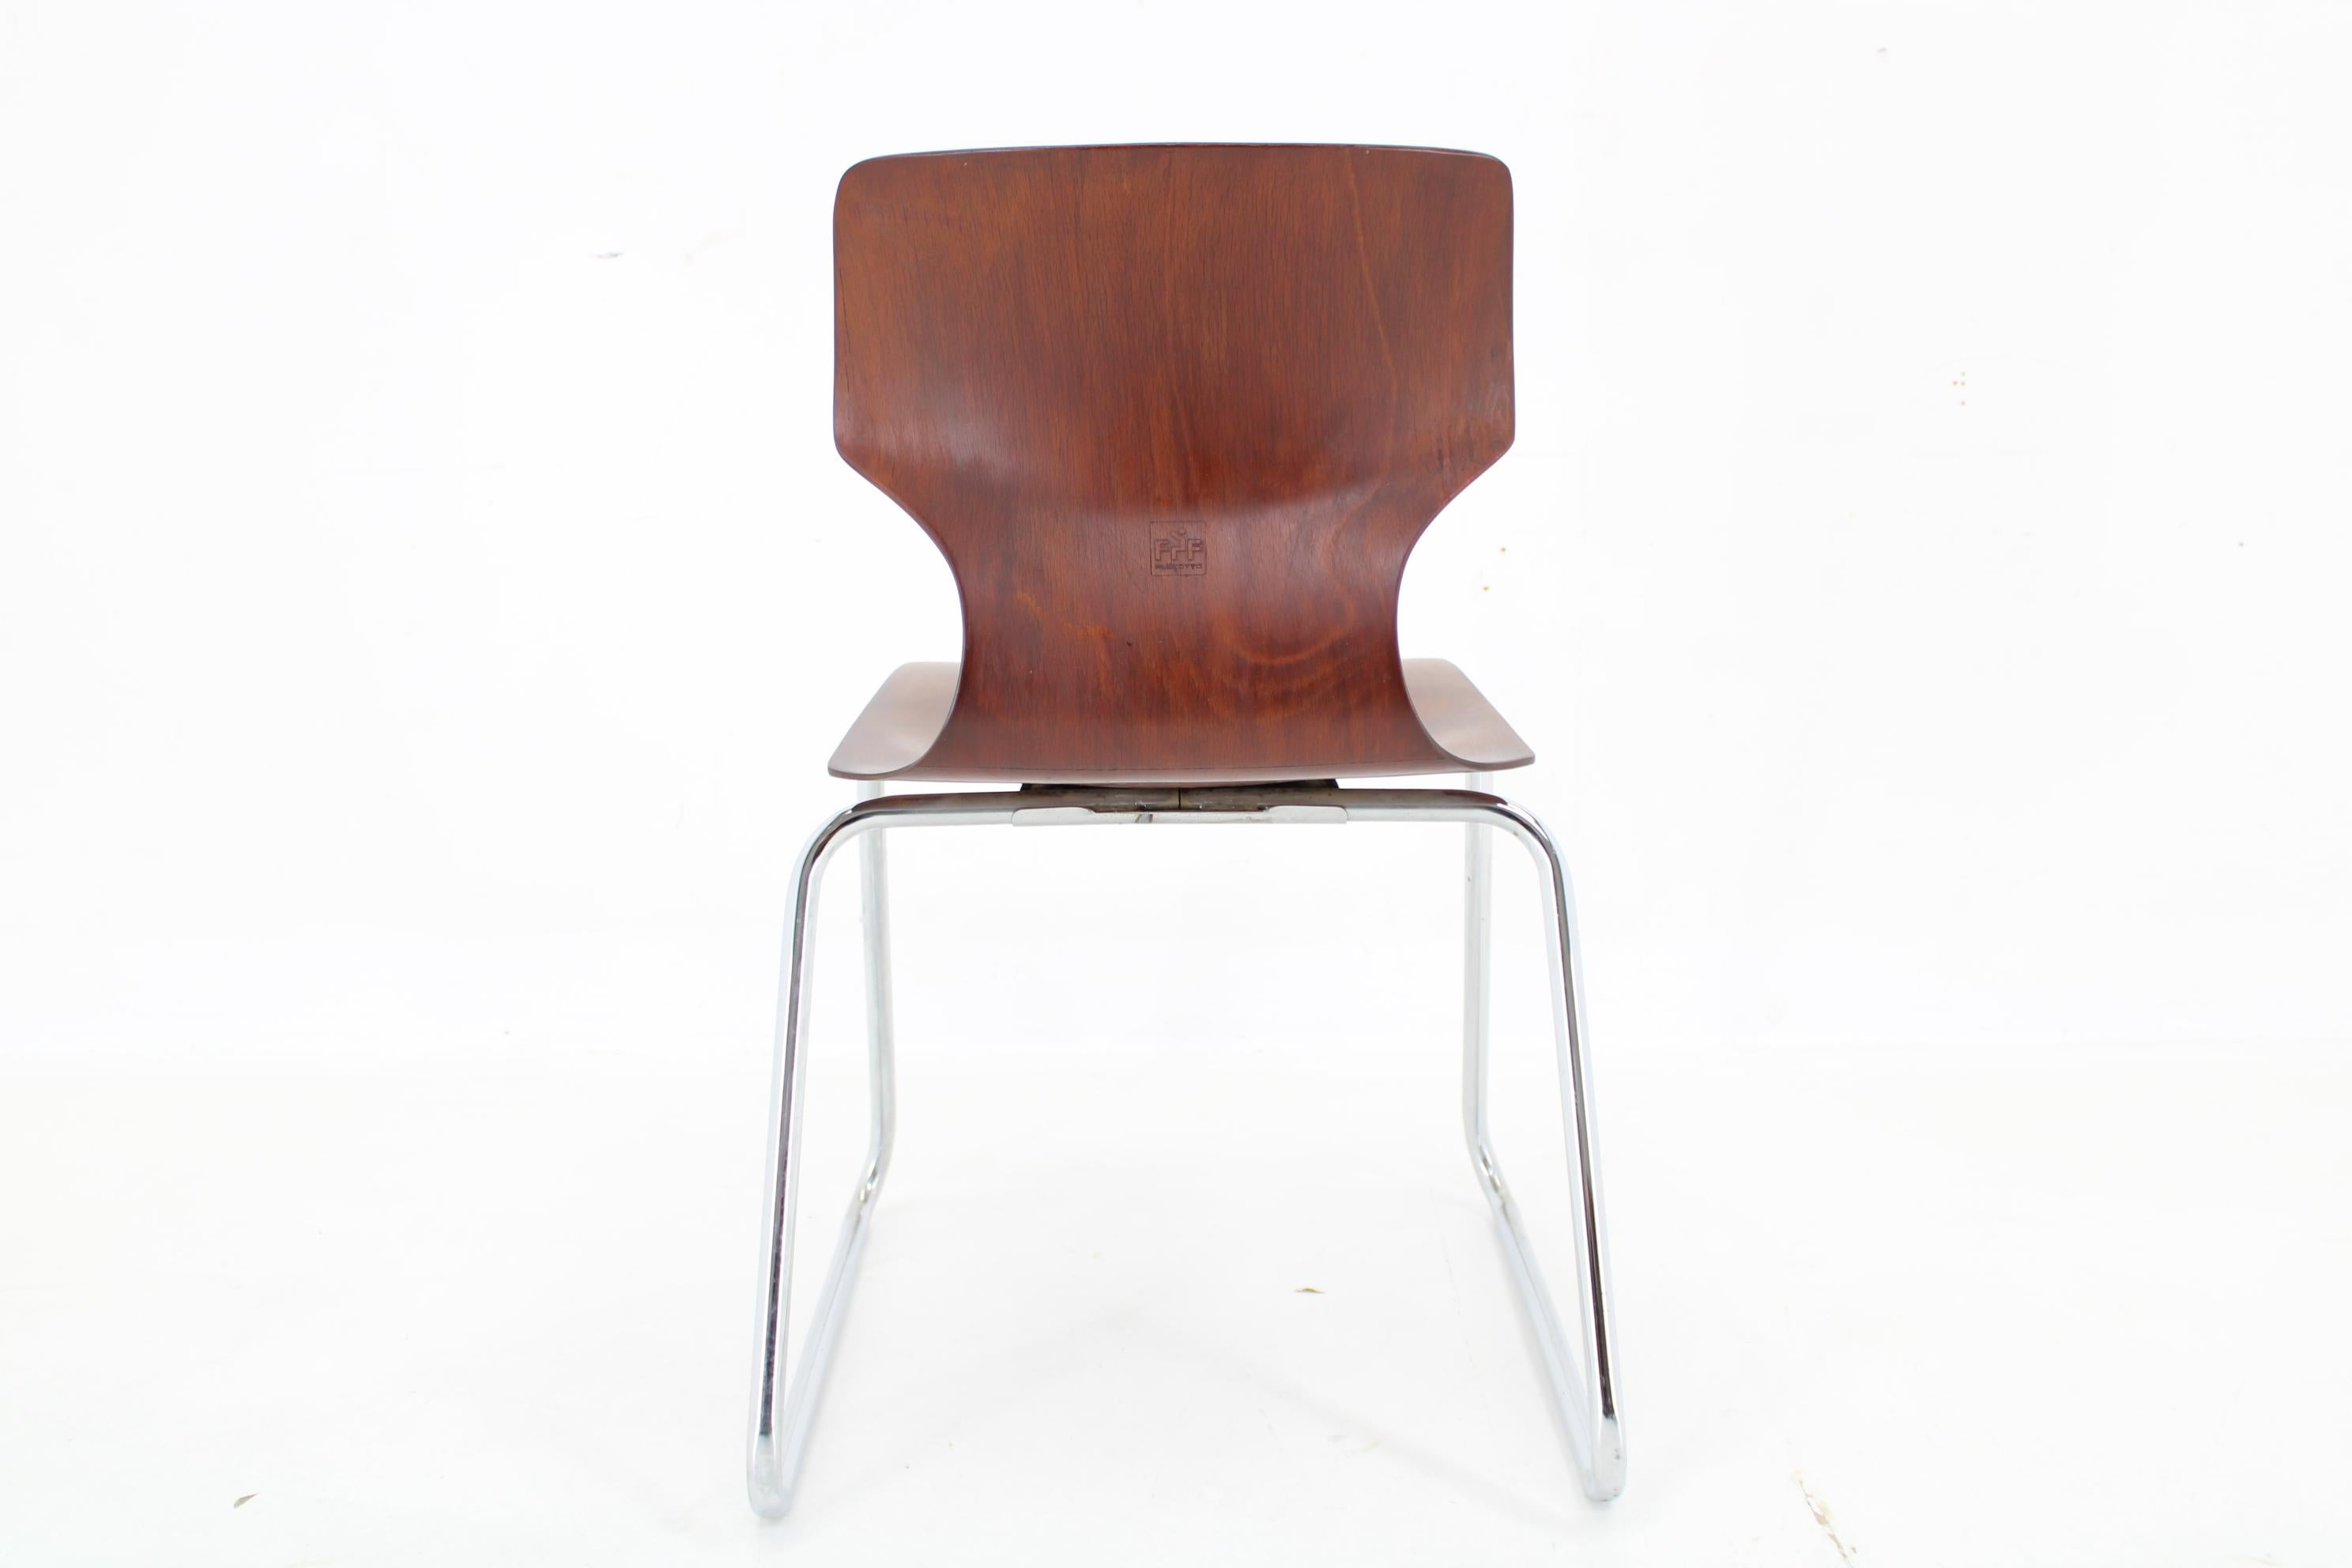 1970s Elmar Flototto Dining or Side Chair, Germany -40 Pieces Available For Sale 2